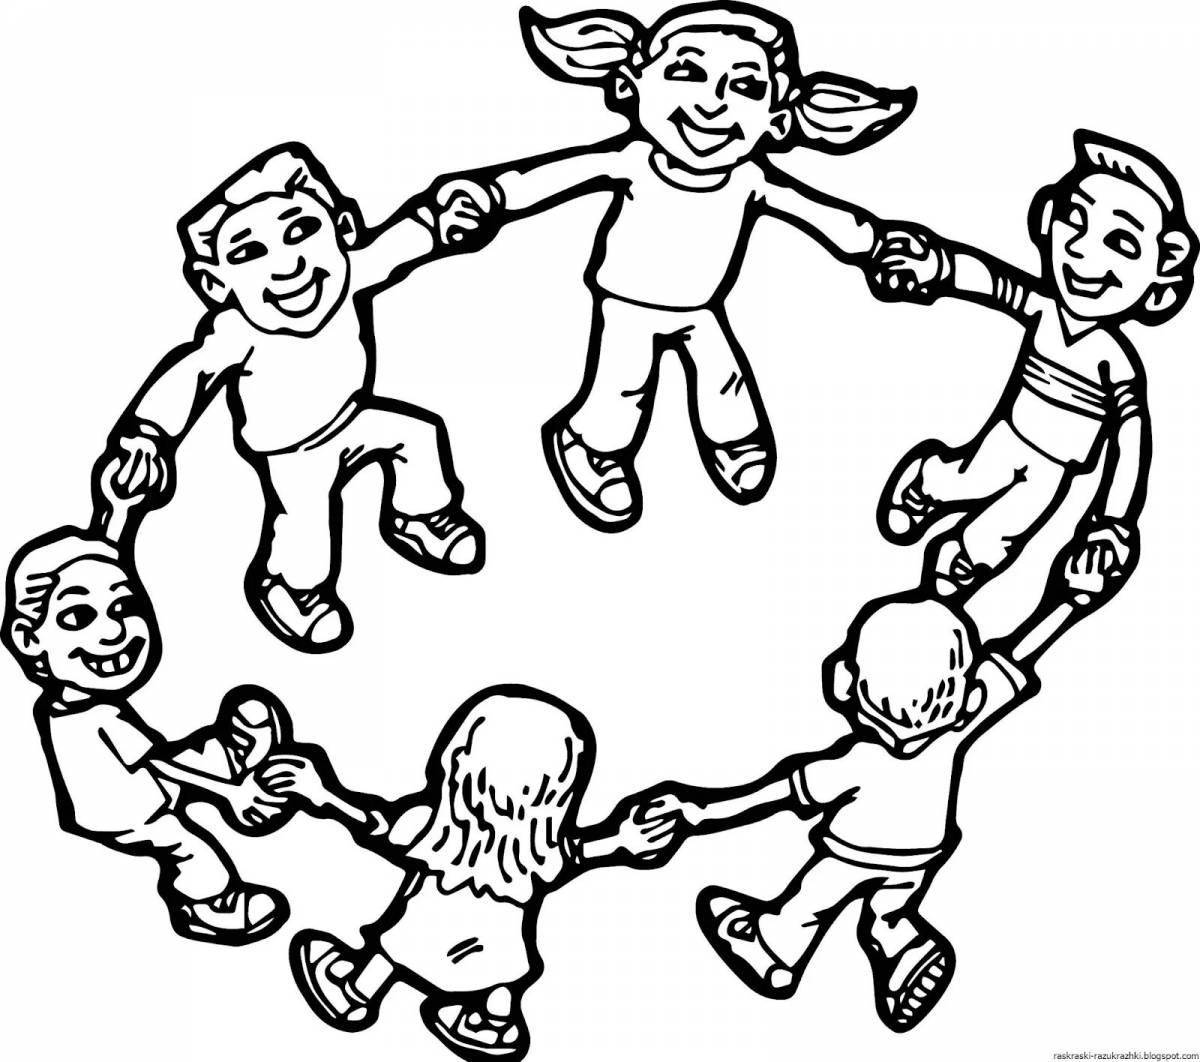 Violent children playing coloring pages